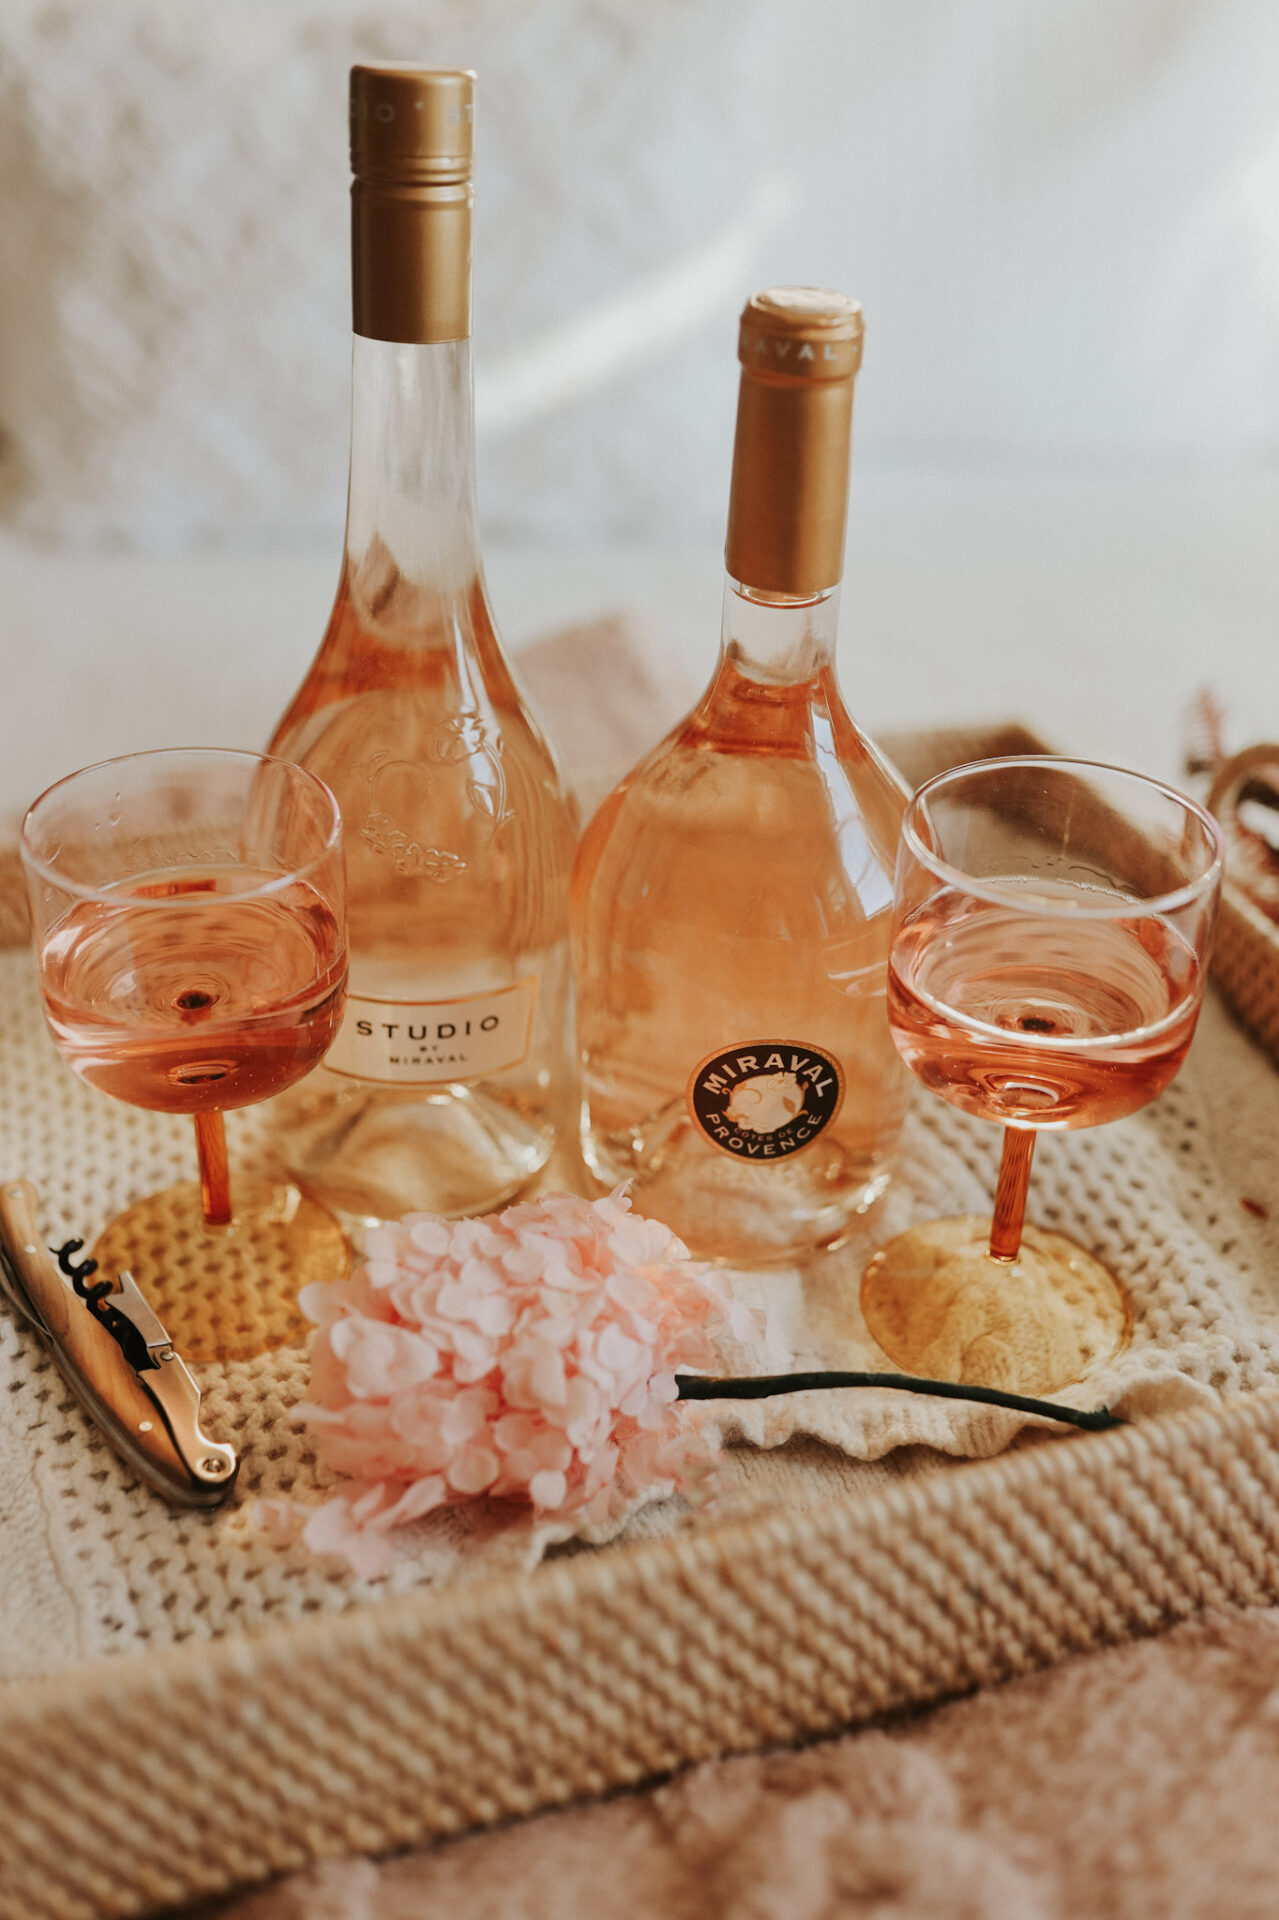 Miraval rose wine bottles with wine glasses